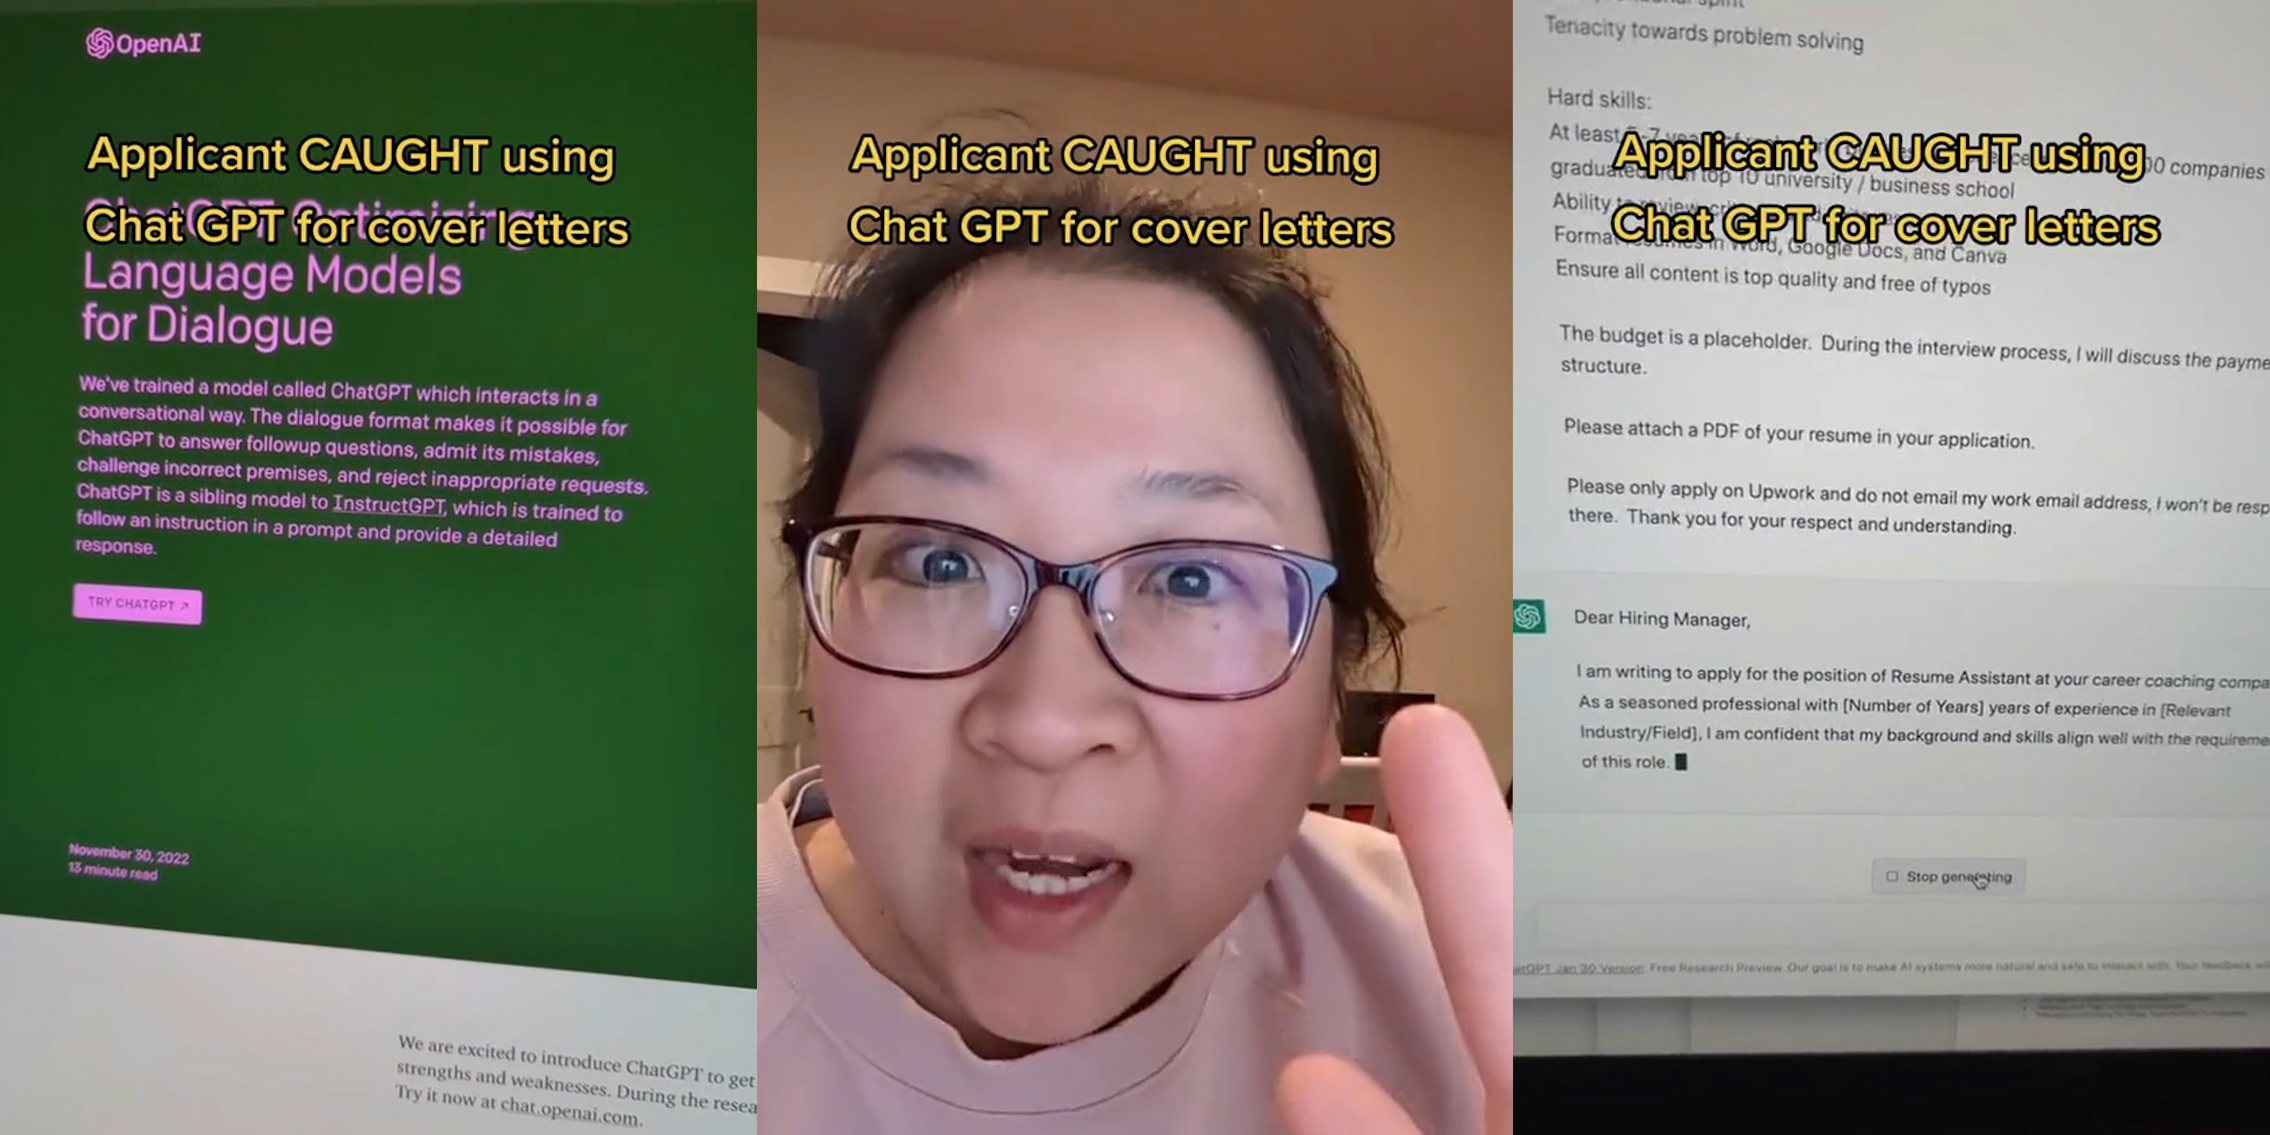 OpenAI Chat GPT on website with caption 'Applicant CAUGHT using Chat GPT for cover letters' (l) woman speaking with caption 'Applicant CAUGHT using Chat GPT for cover letters' (c) cover letter with Chat GPT typing at bottom with caption 'Applicant CAUGHT using Chat GPT for cover letters' (r)